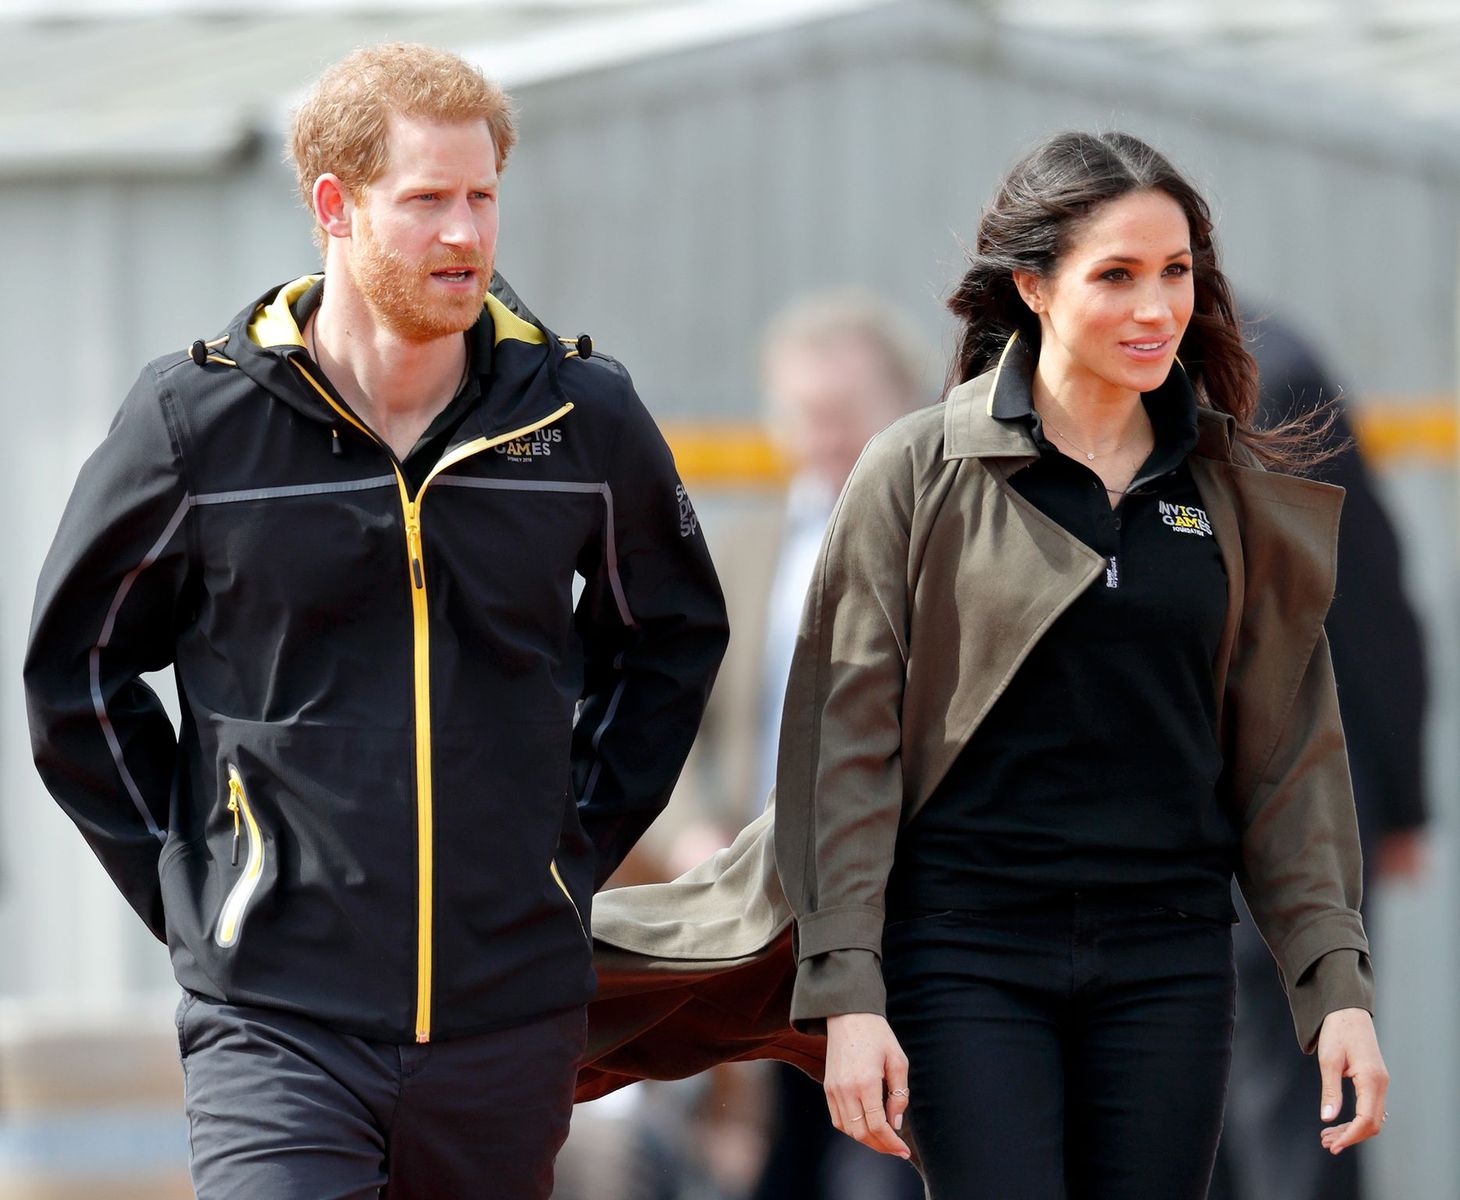 Prince Harry and Duchess Meghan at the UK Team Trials for the Invictus Games on April 6, 2018, in Bath, England | Photo: Max Mumby/Indigo/Getty Images